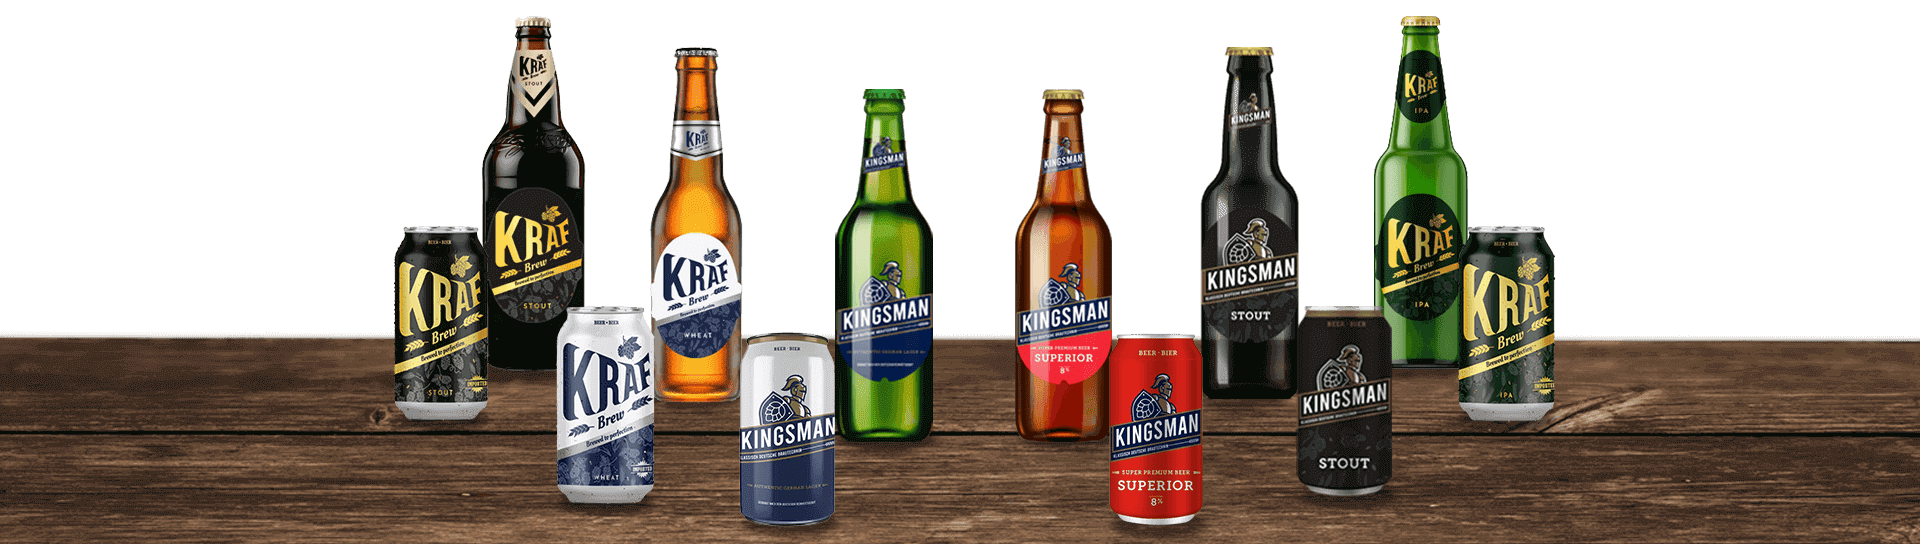 Kingsman Beer On Available On Cans And In Bottles At Bars